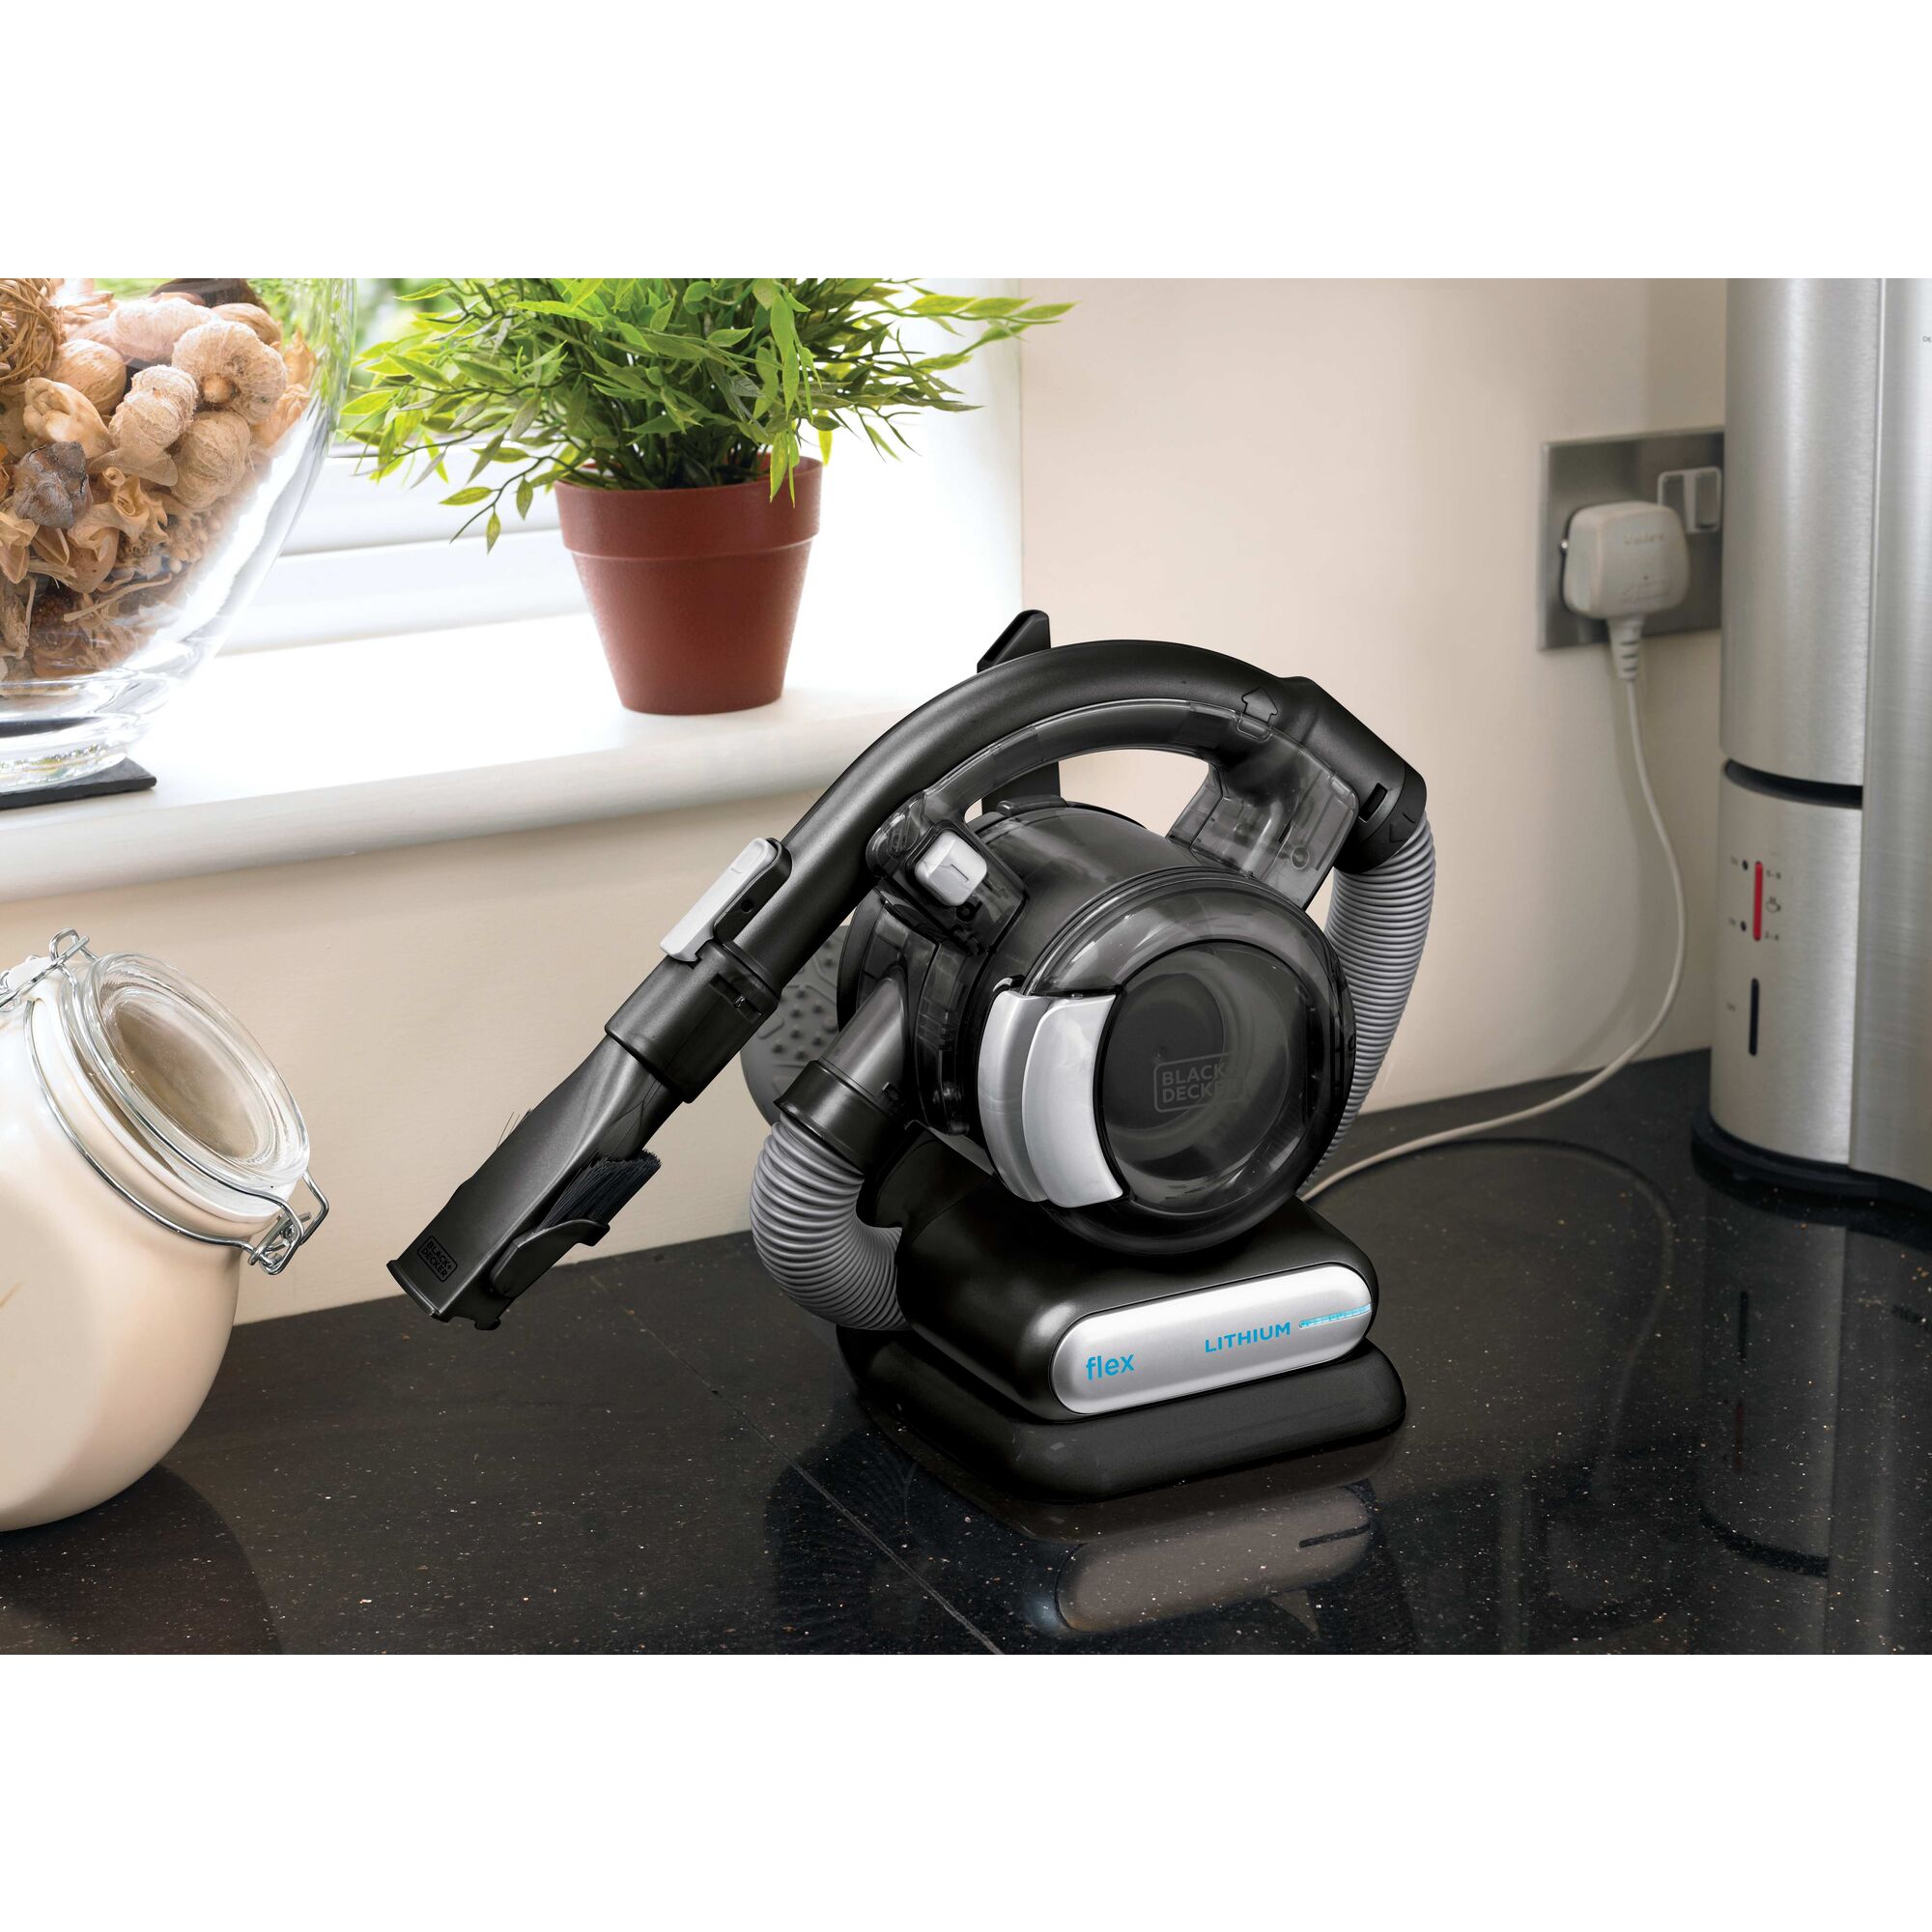 Charging Base with Accessory Storage feature of dust buster Flex Cordless Hand Vacuum.